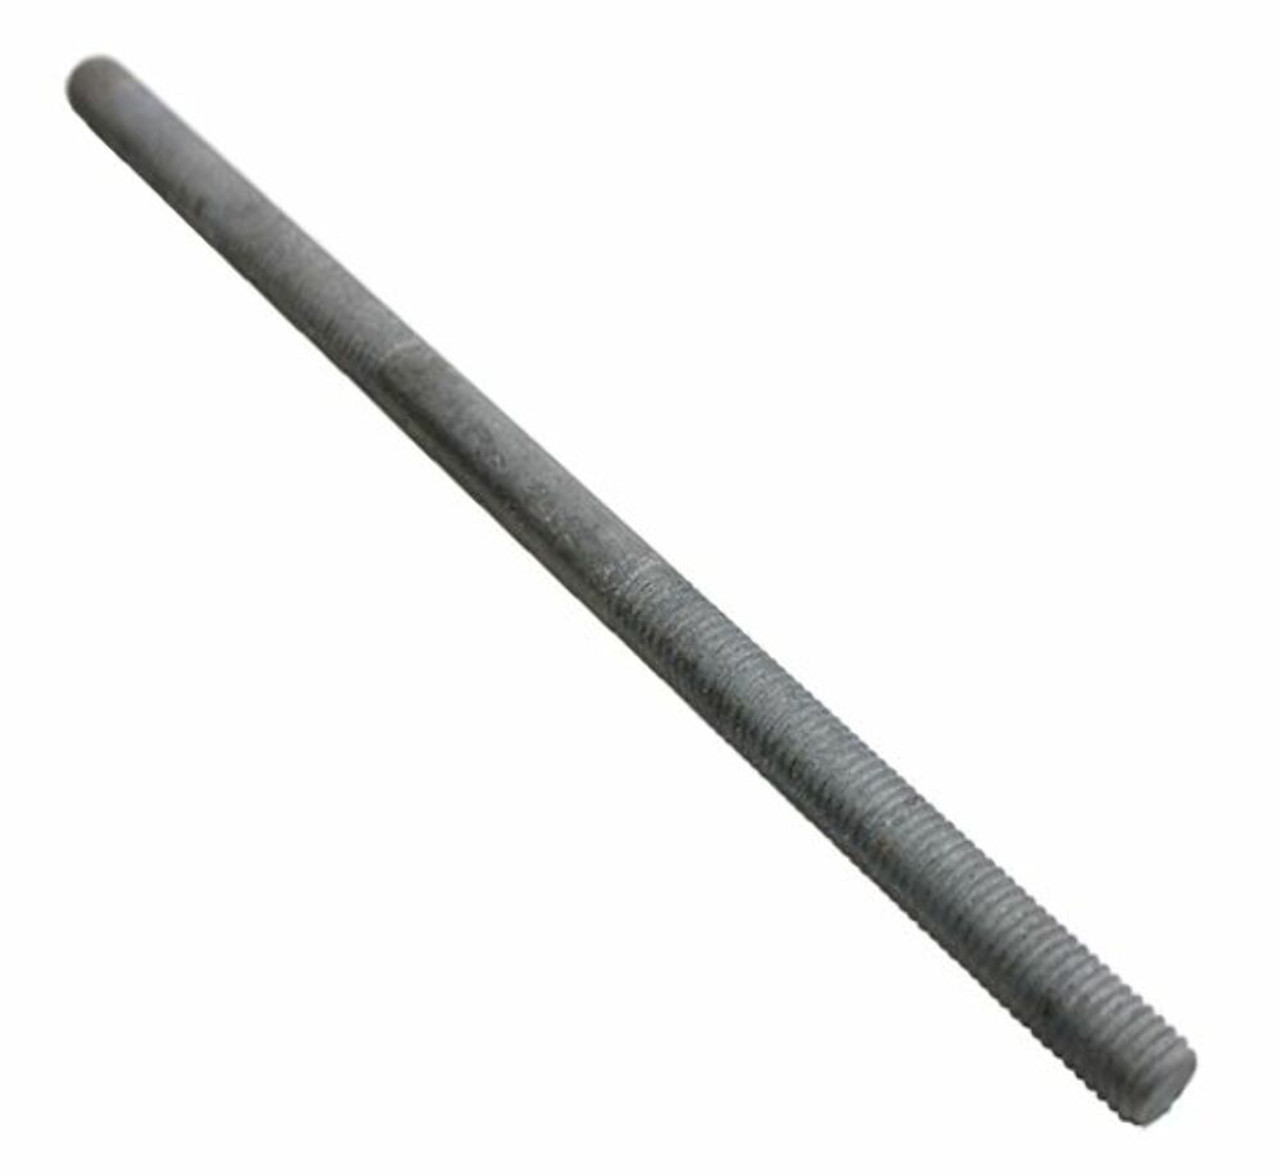 9/16-12 x 11 Double-End Threaded Rod Hot Dipped Galvanized Steel